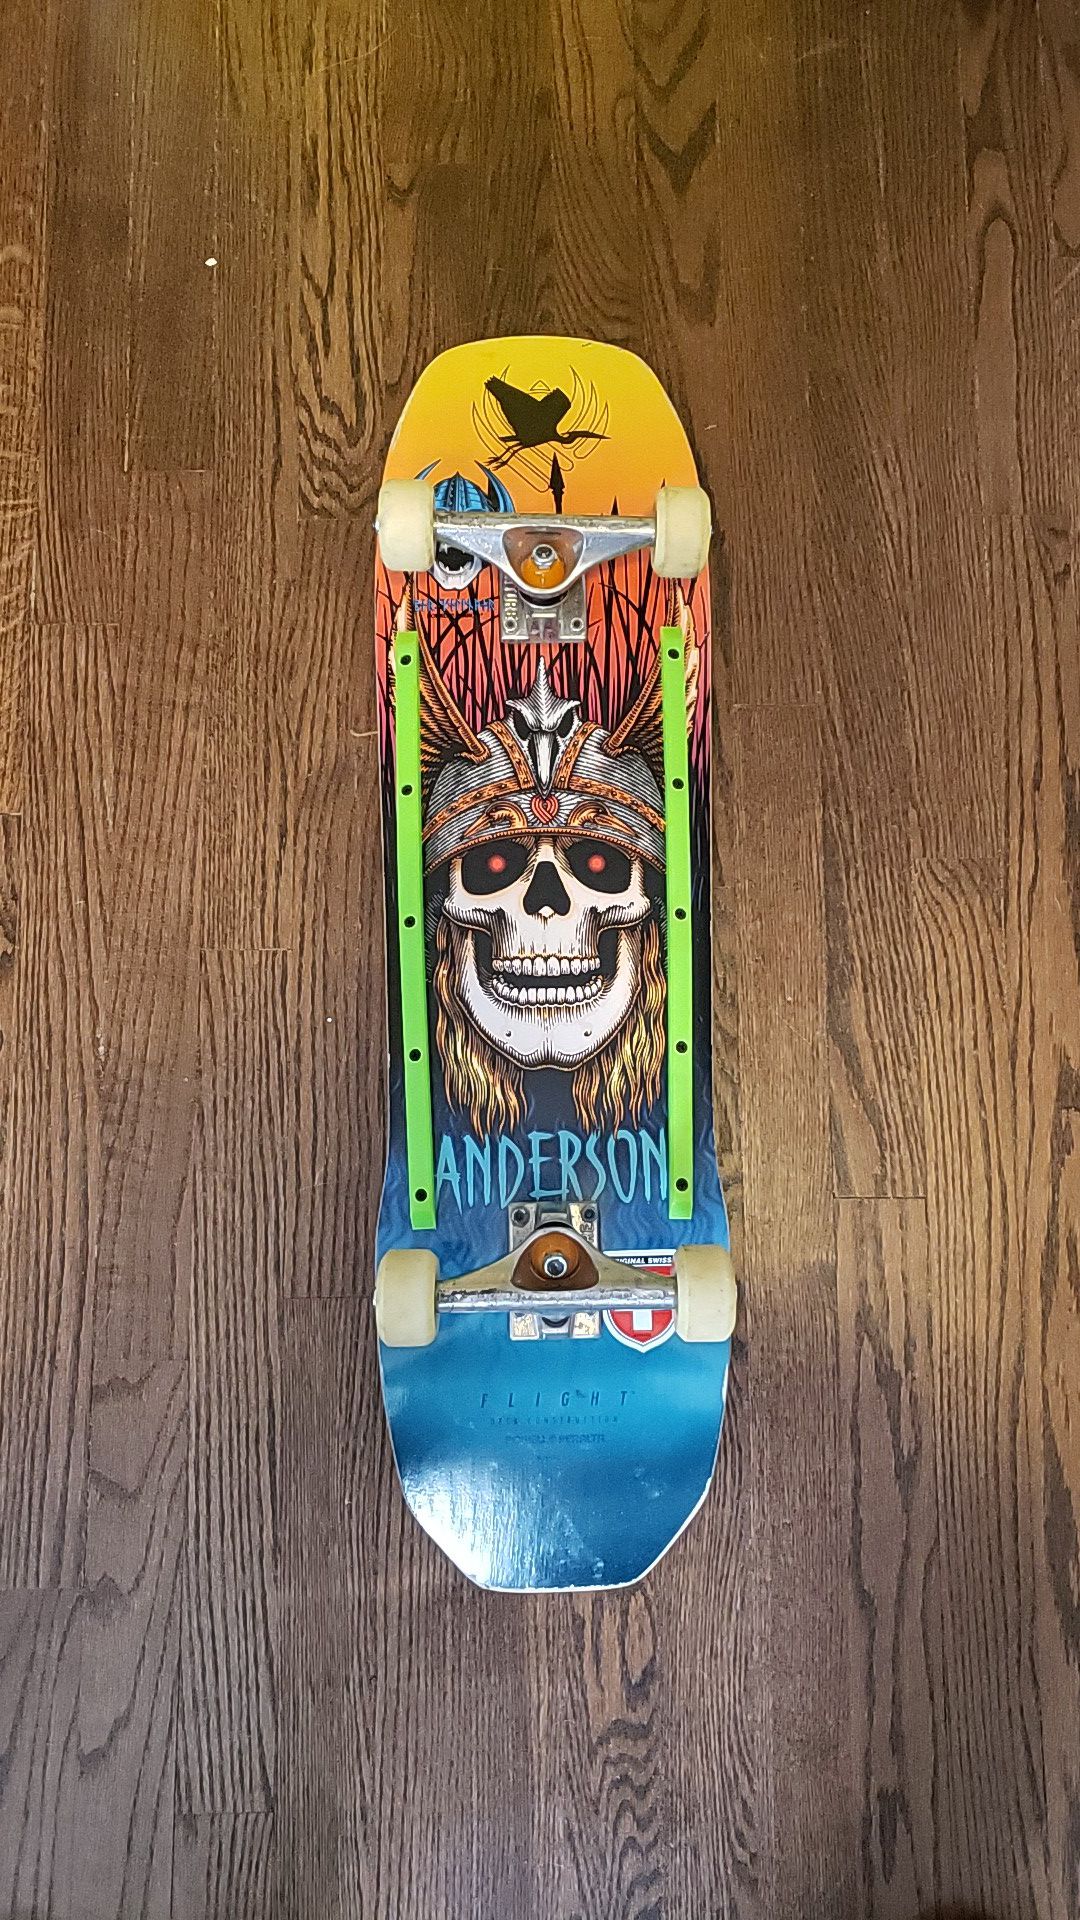 Andy Anderson powell Peralta skateboard